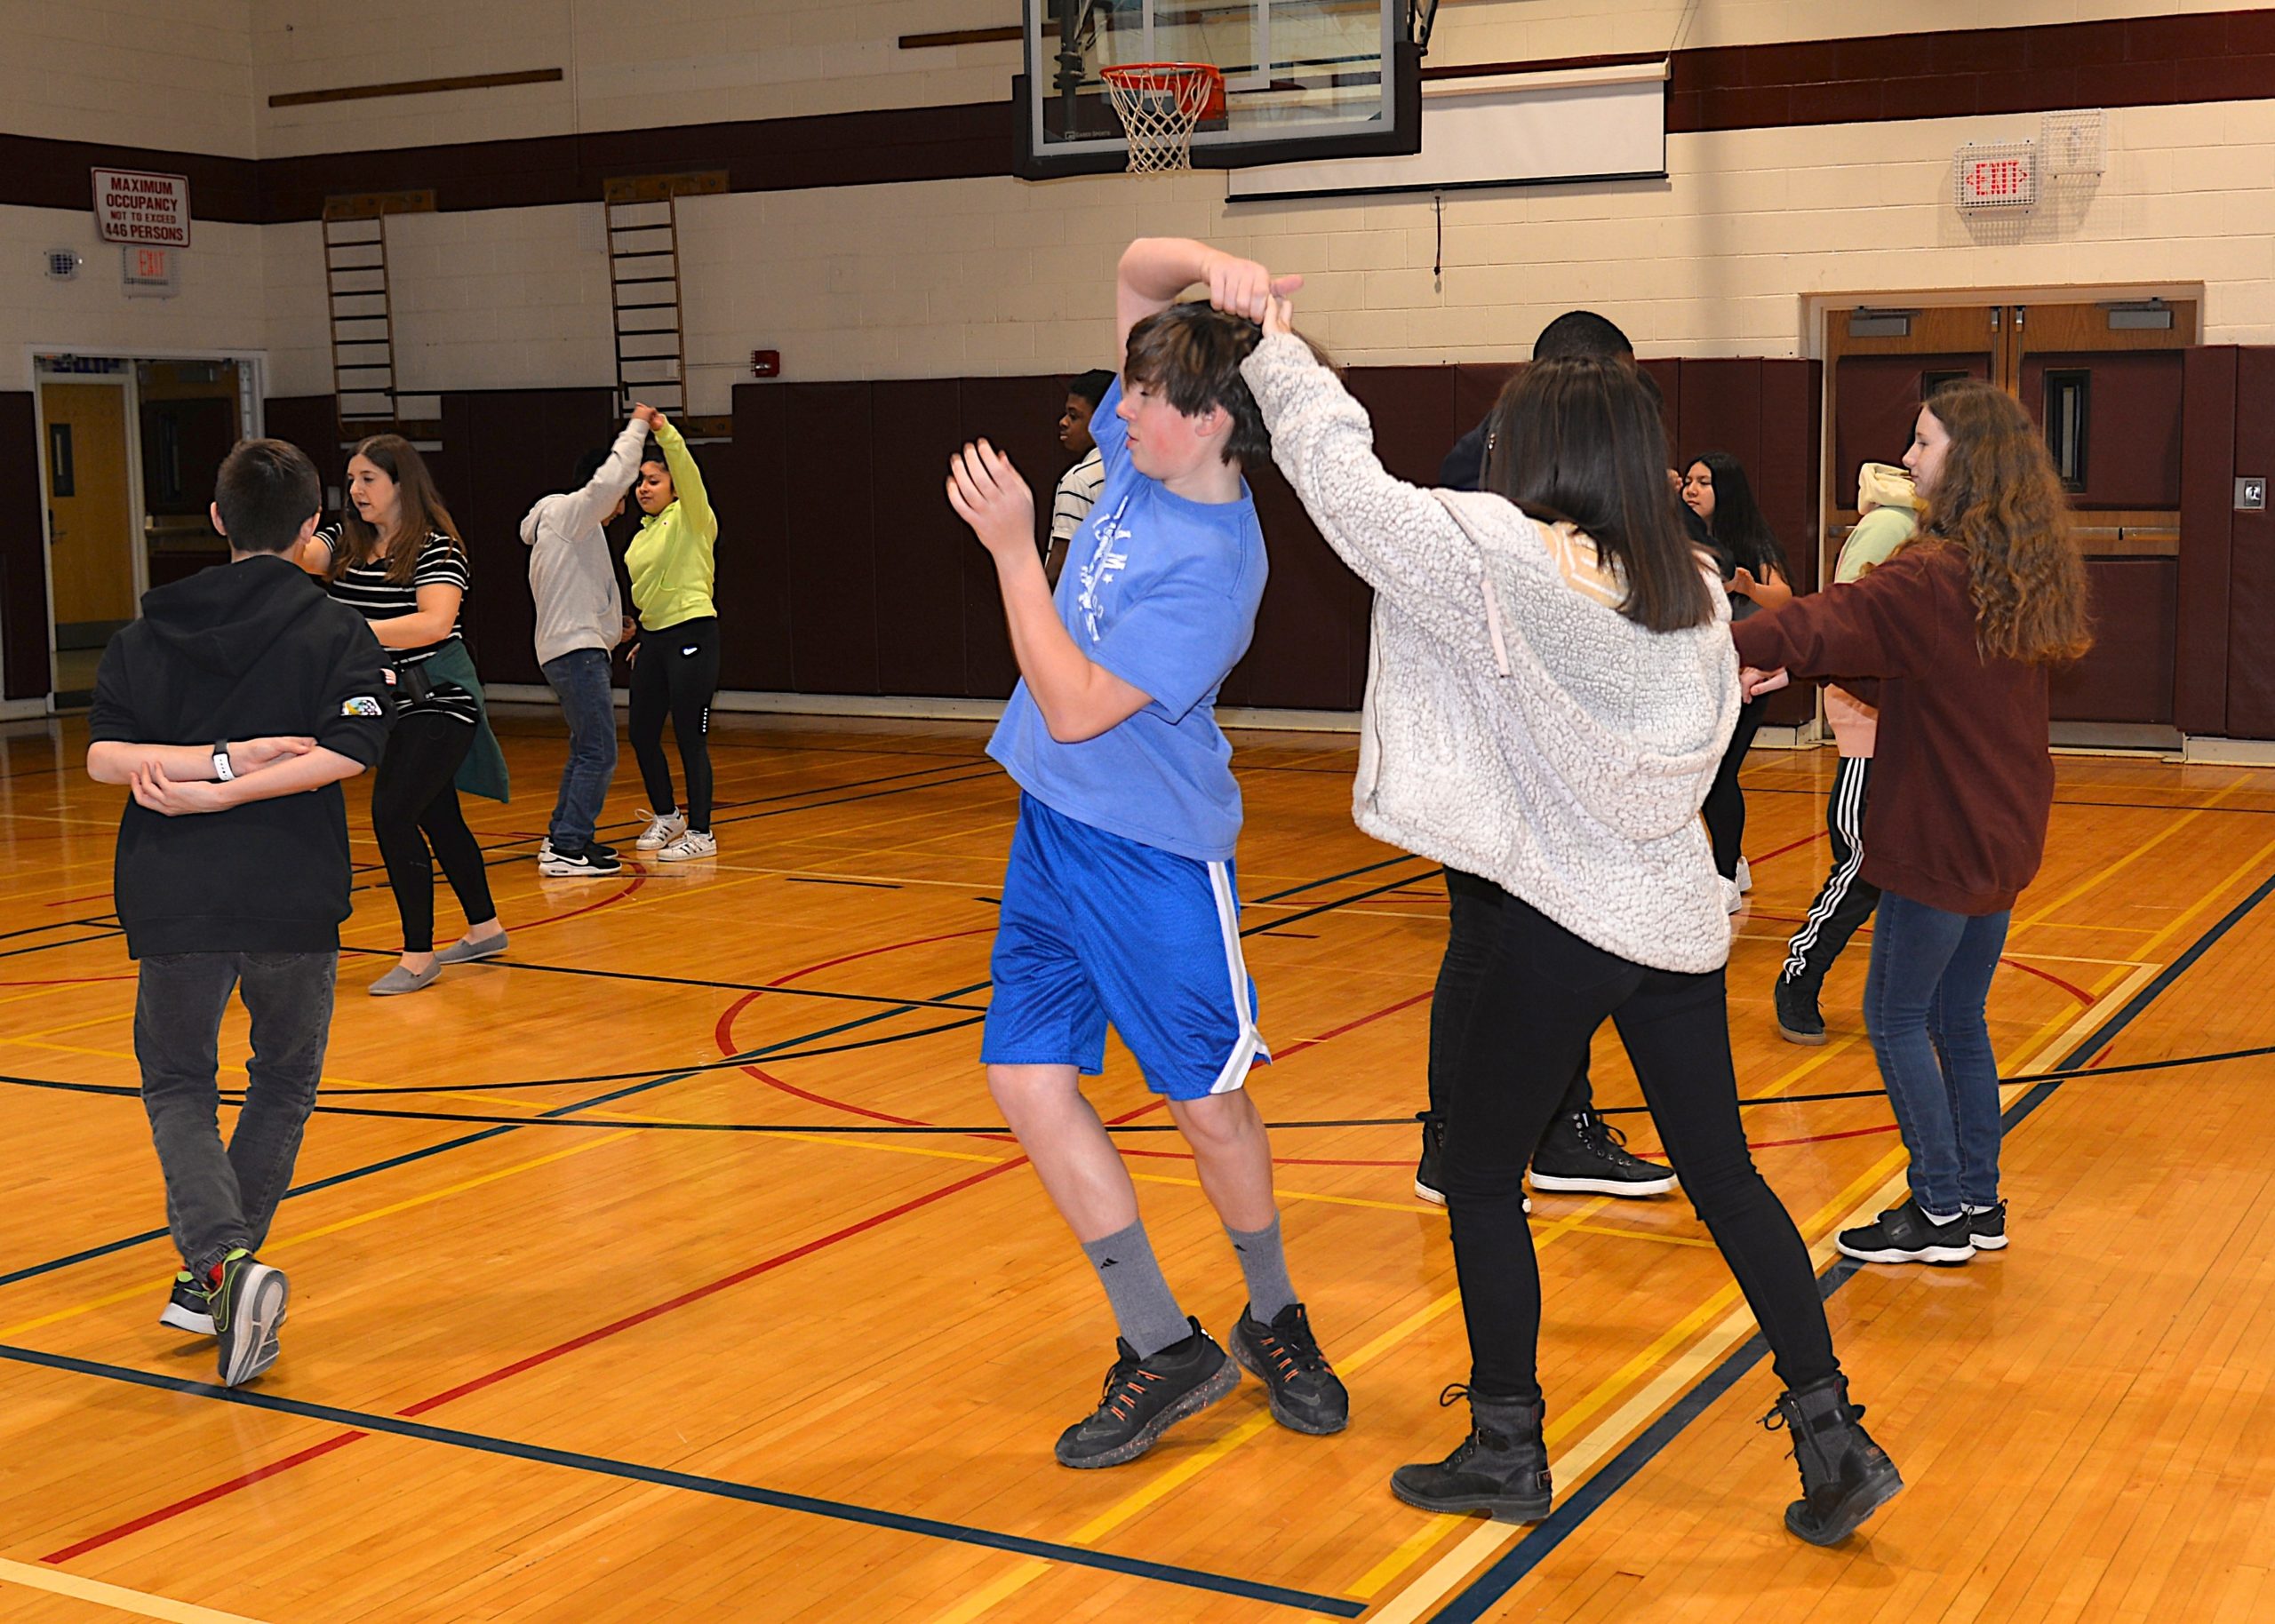 East Hampton Middle School students prepare for the Mad Heart Ball, which takes place at the school on Friday, February 7. KYRIL BROMLEY